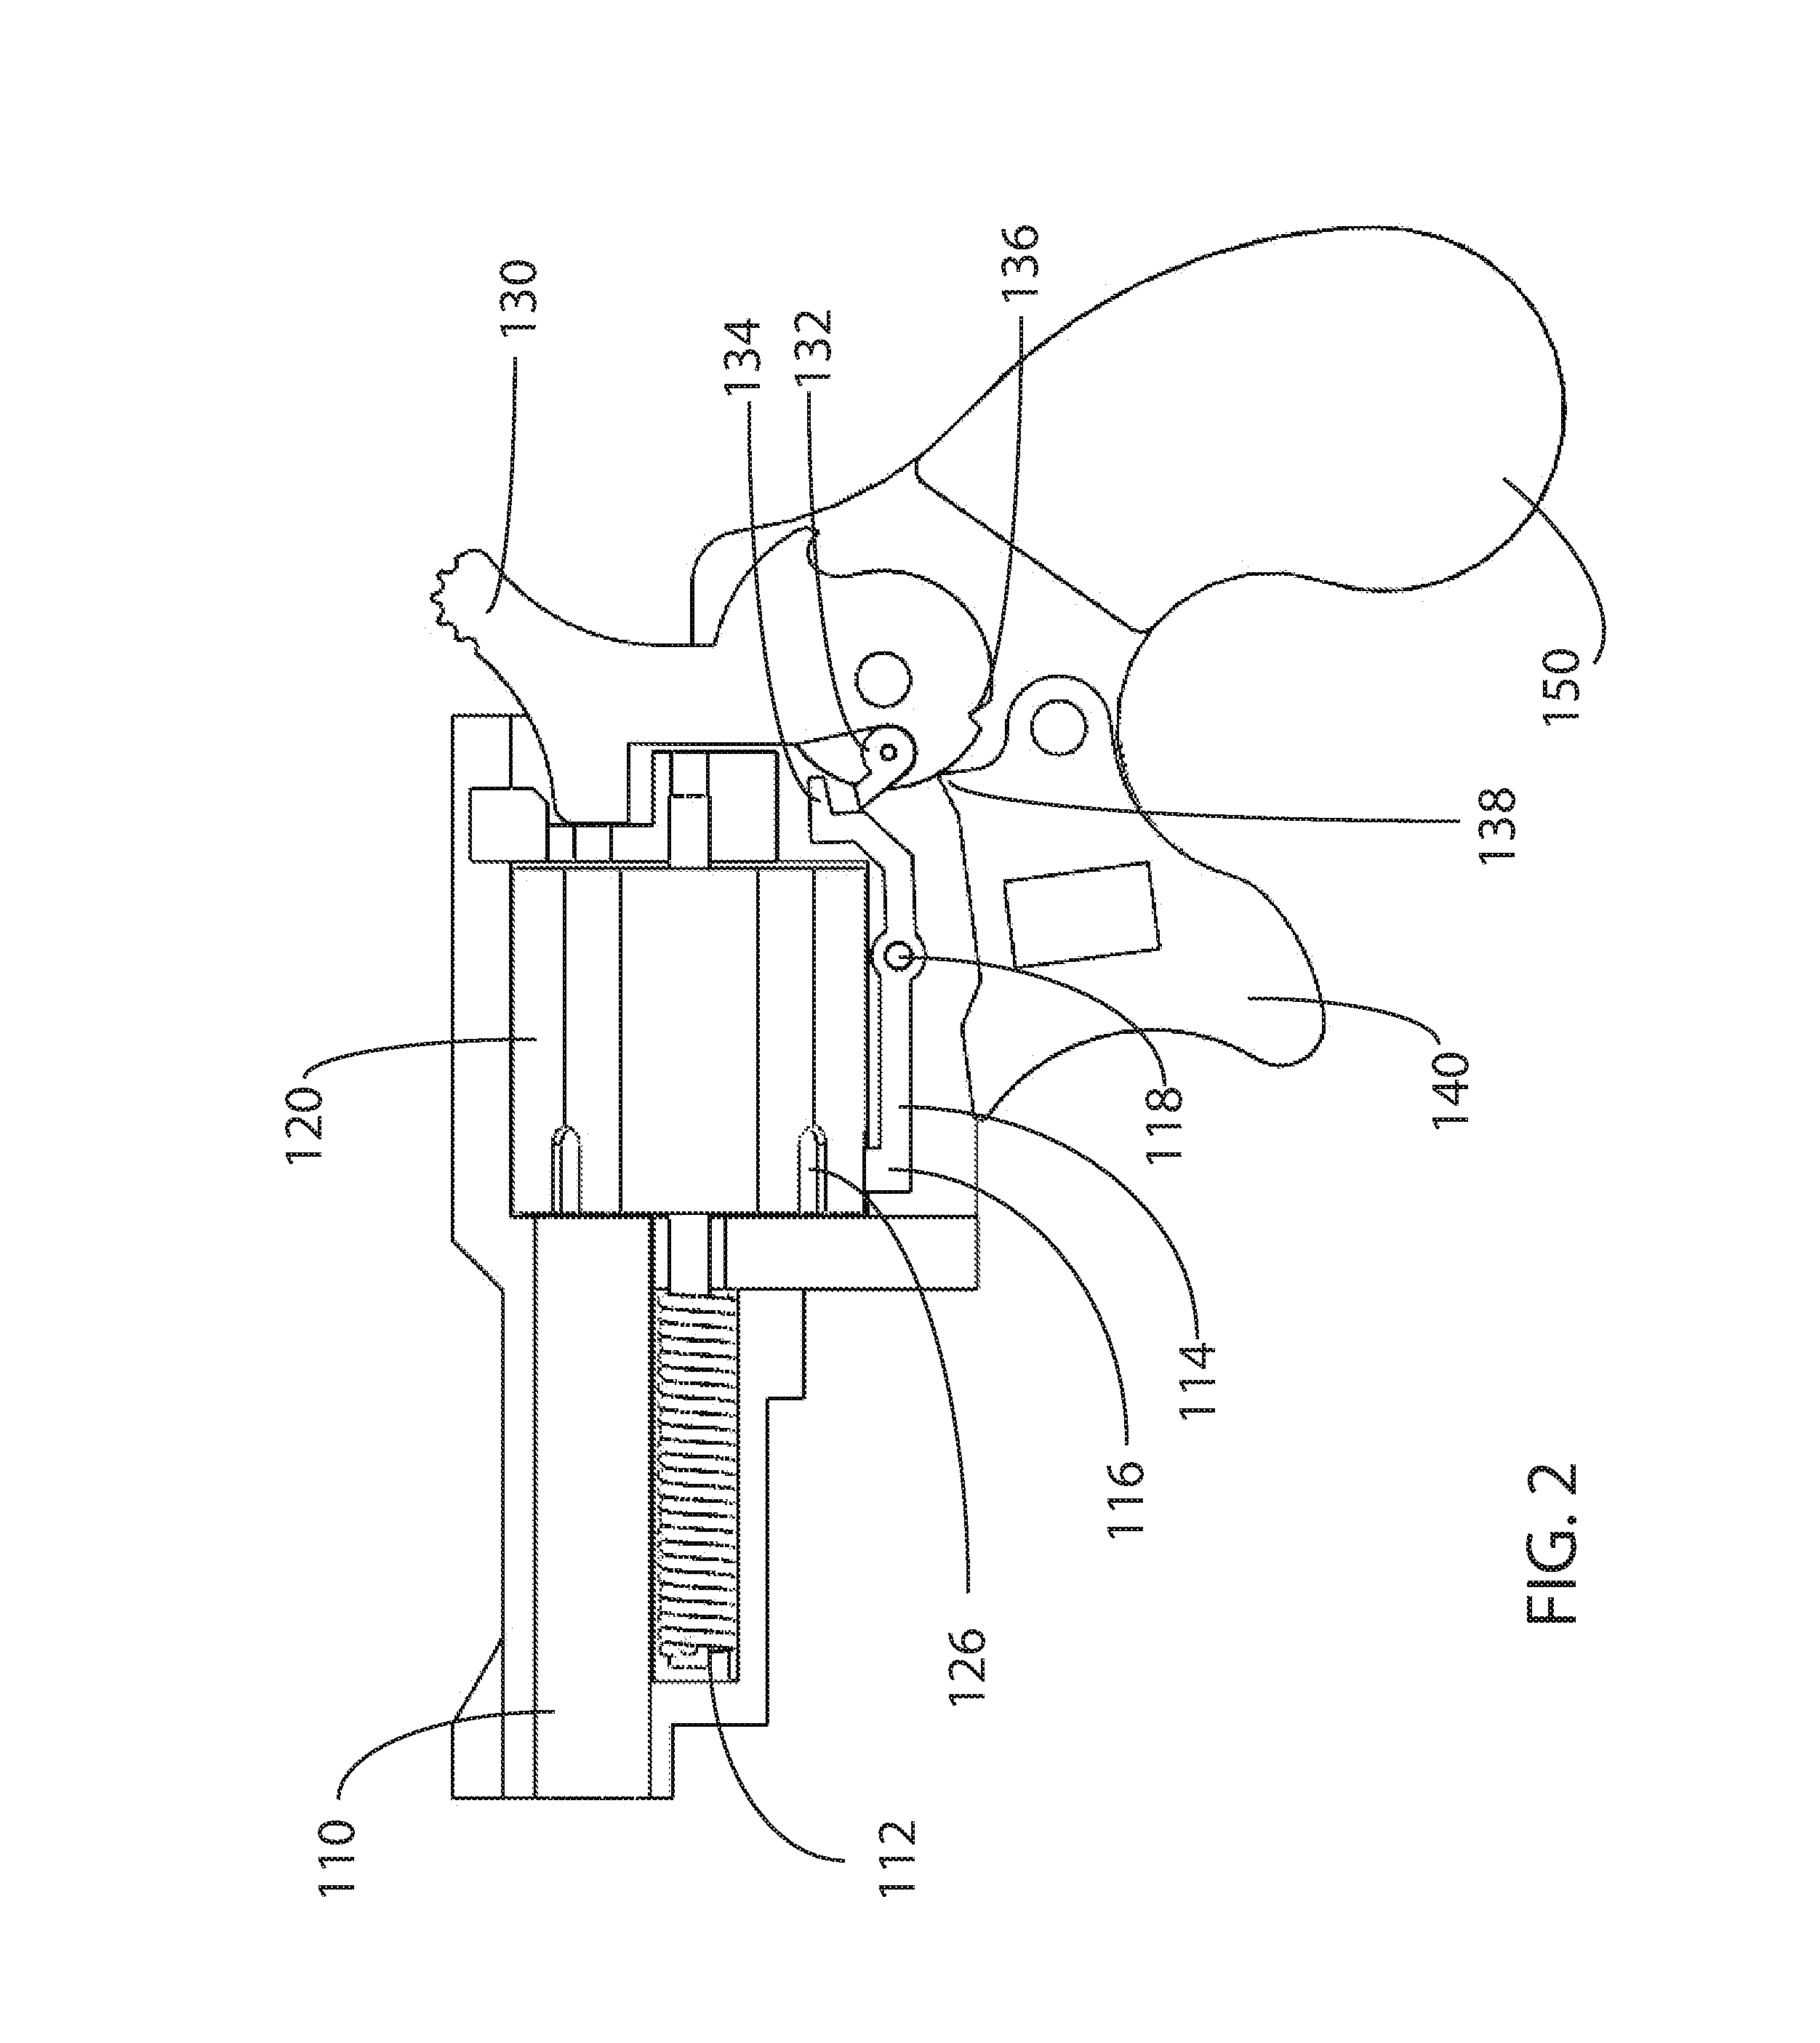 Extendable Tang for a Firearm